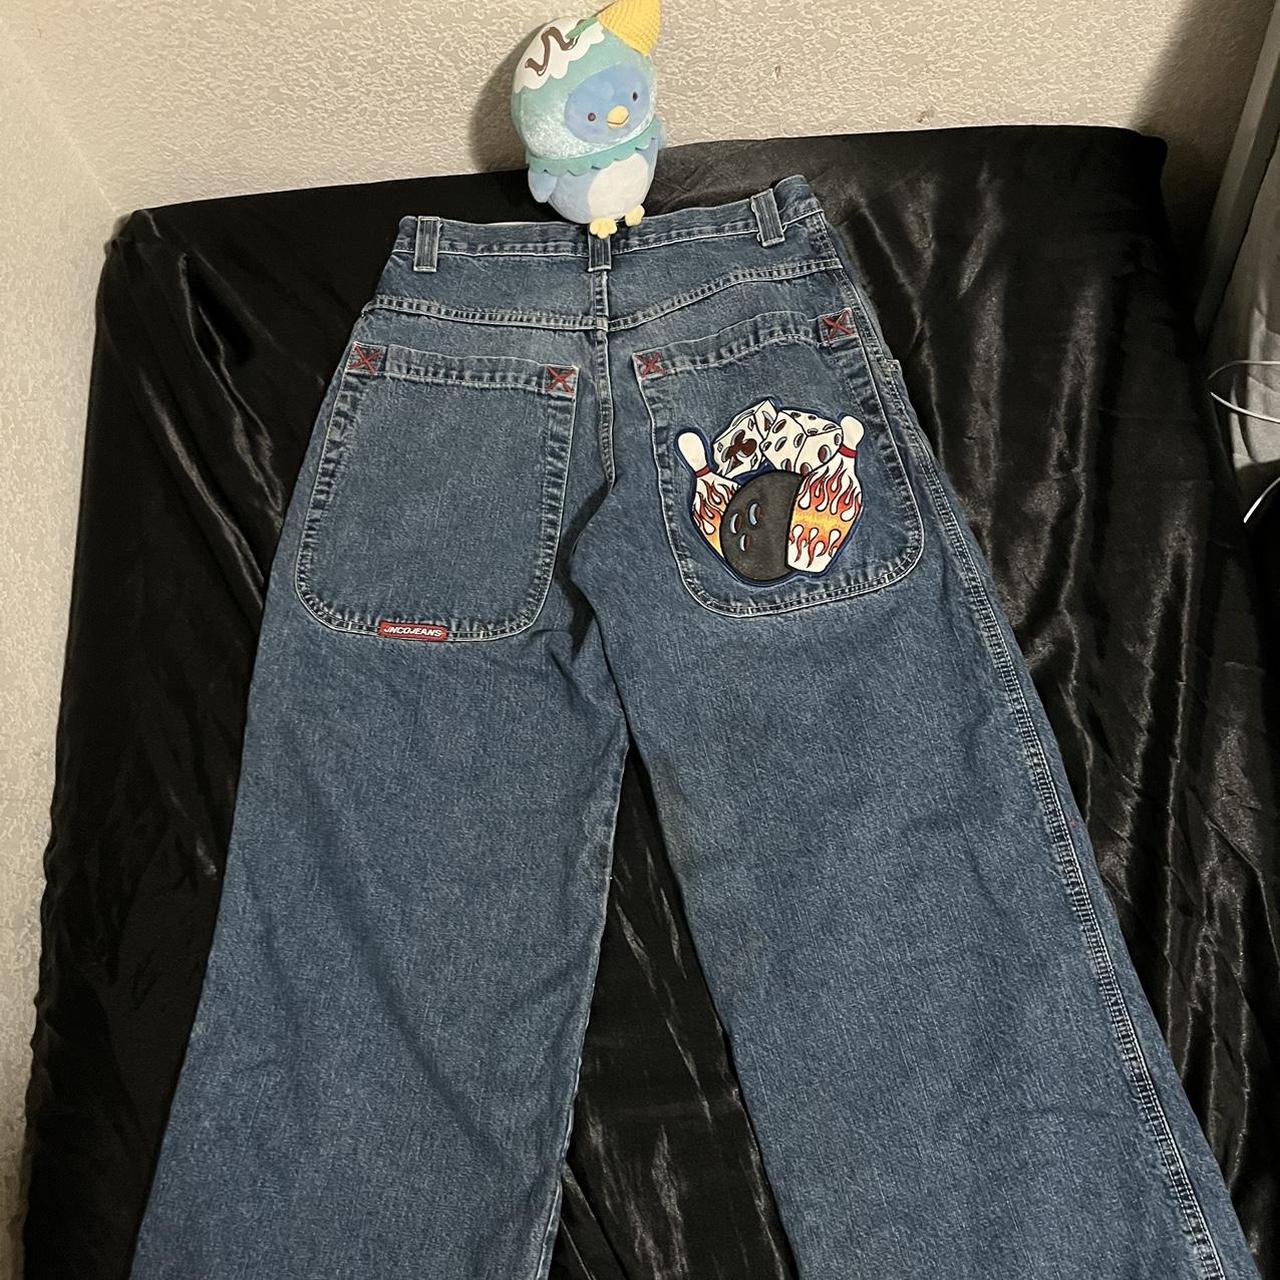 HELLA RARE BOWLING JNCOS Accepting Trade Offers If... - Depop